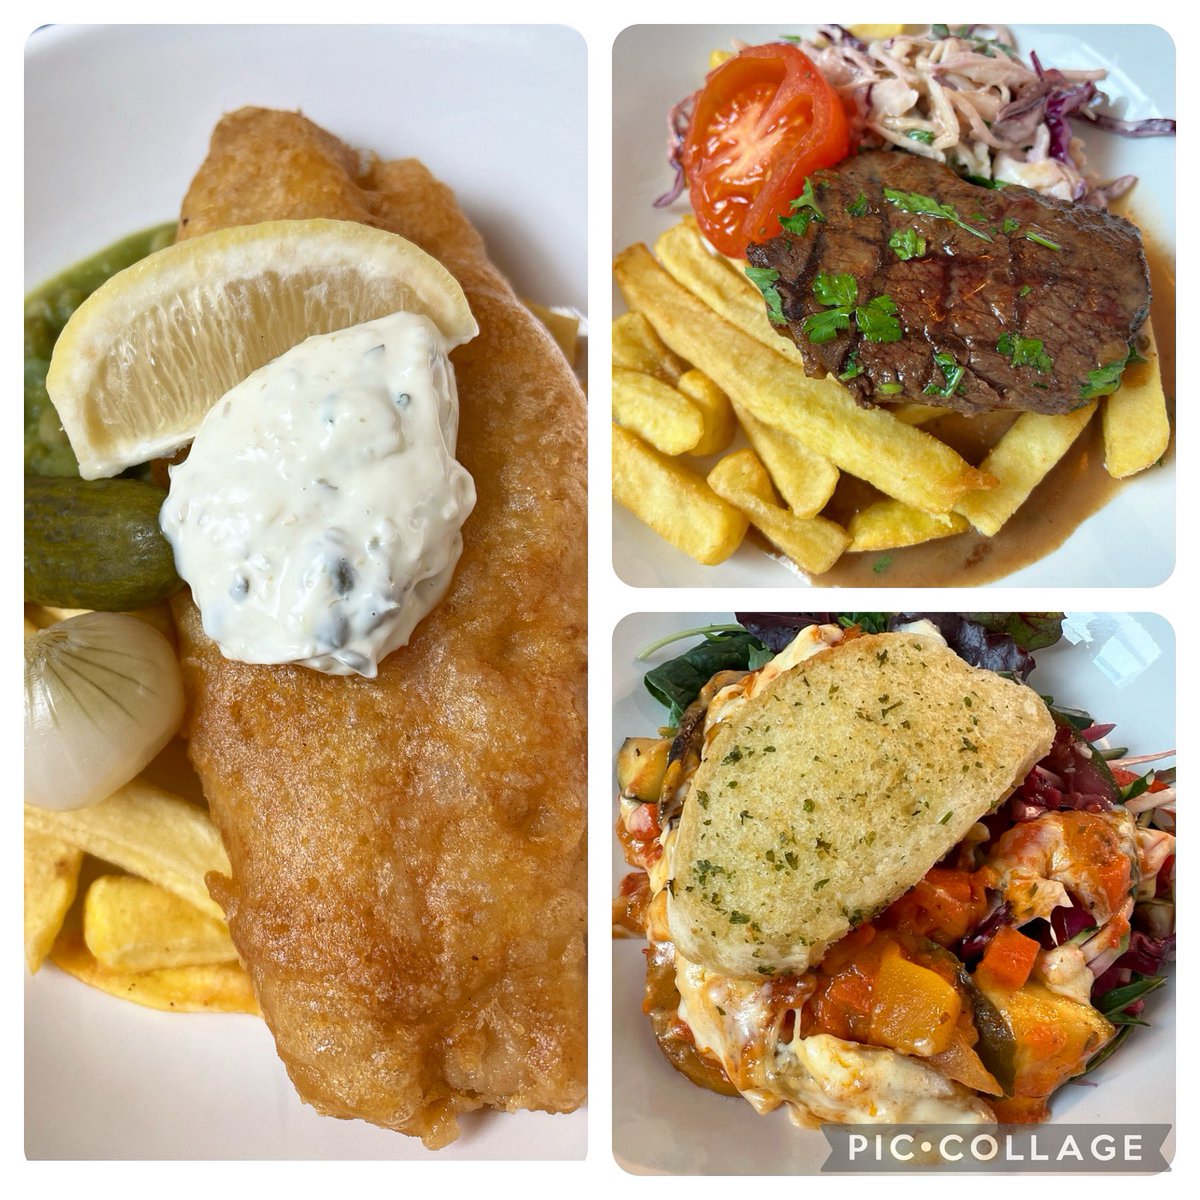 Happy Friday! What a stunning menu we have today: -Tamarind Steak, Peppercorn Sauce and Chips -Vegetable Moussaka and Garlic Bread -ASPH Fish and Chips @LoveBritishFood #greathospitalfood